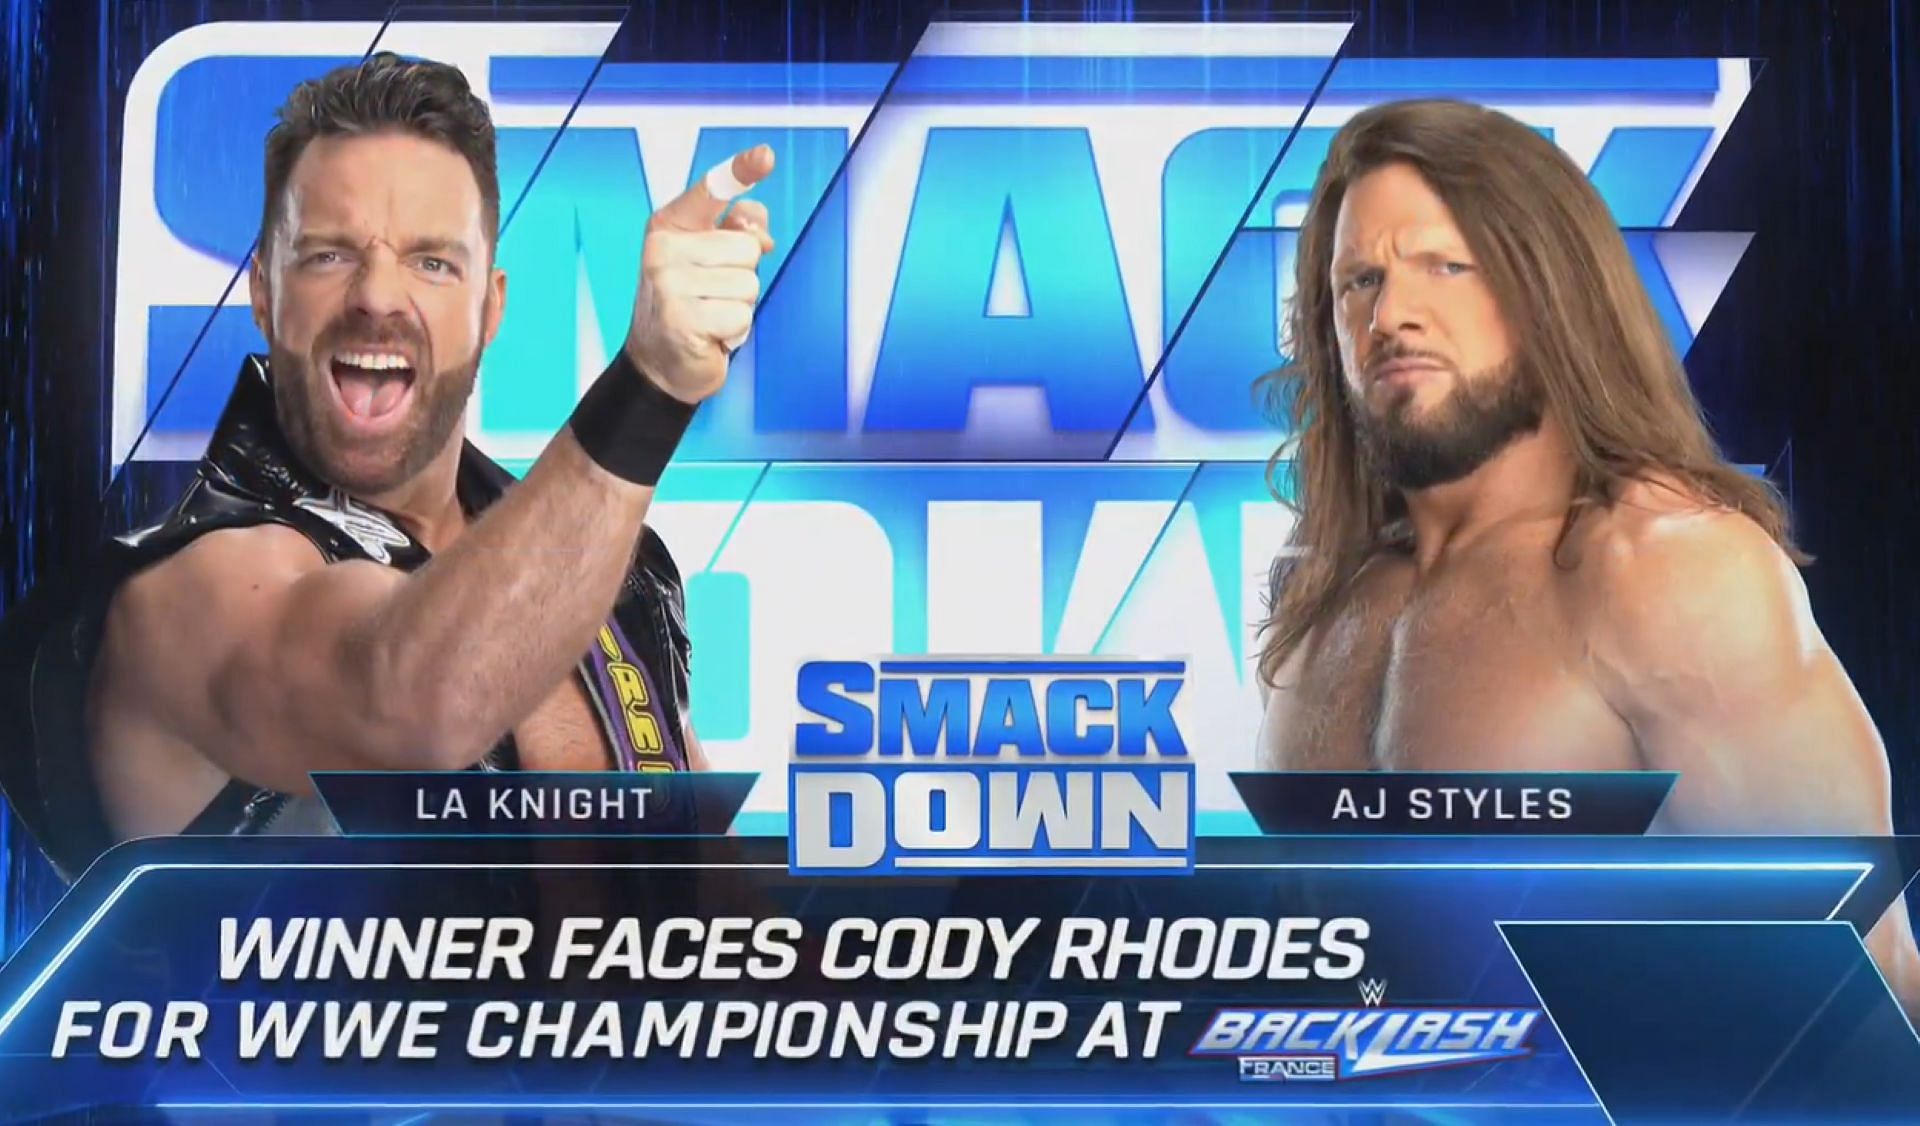 Who will earn the right to face Cody Rhodes at Backlash?